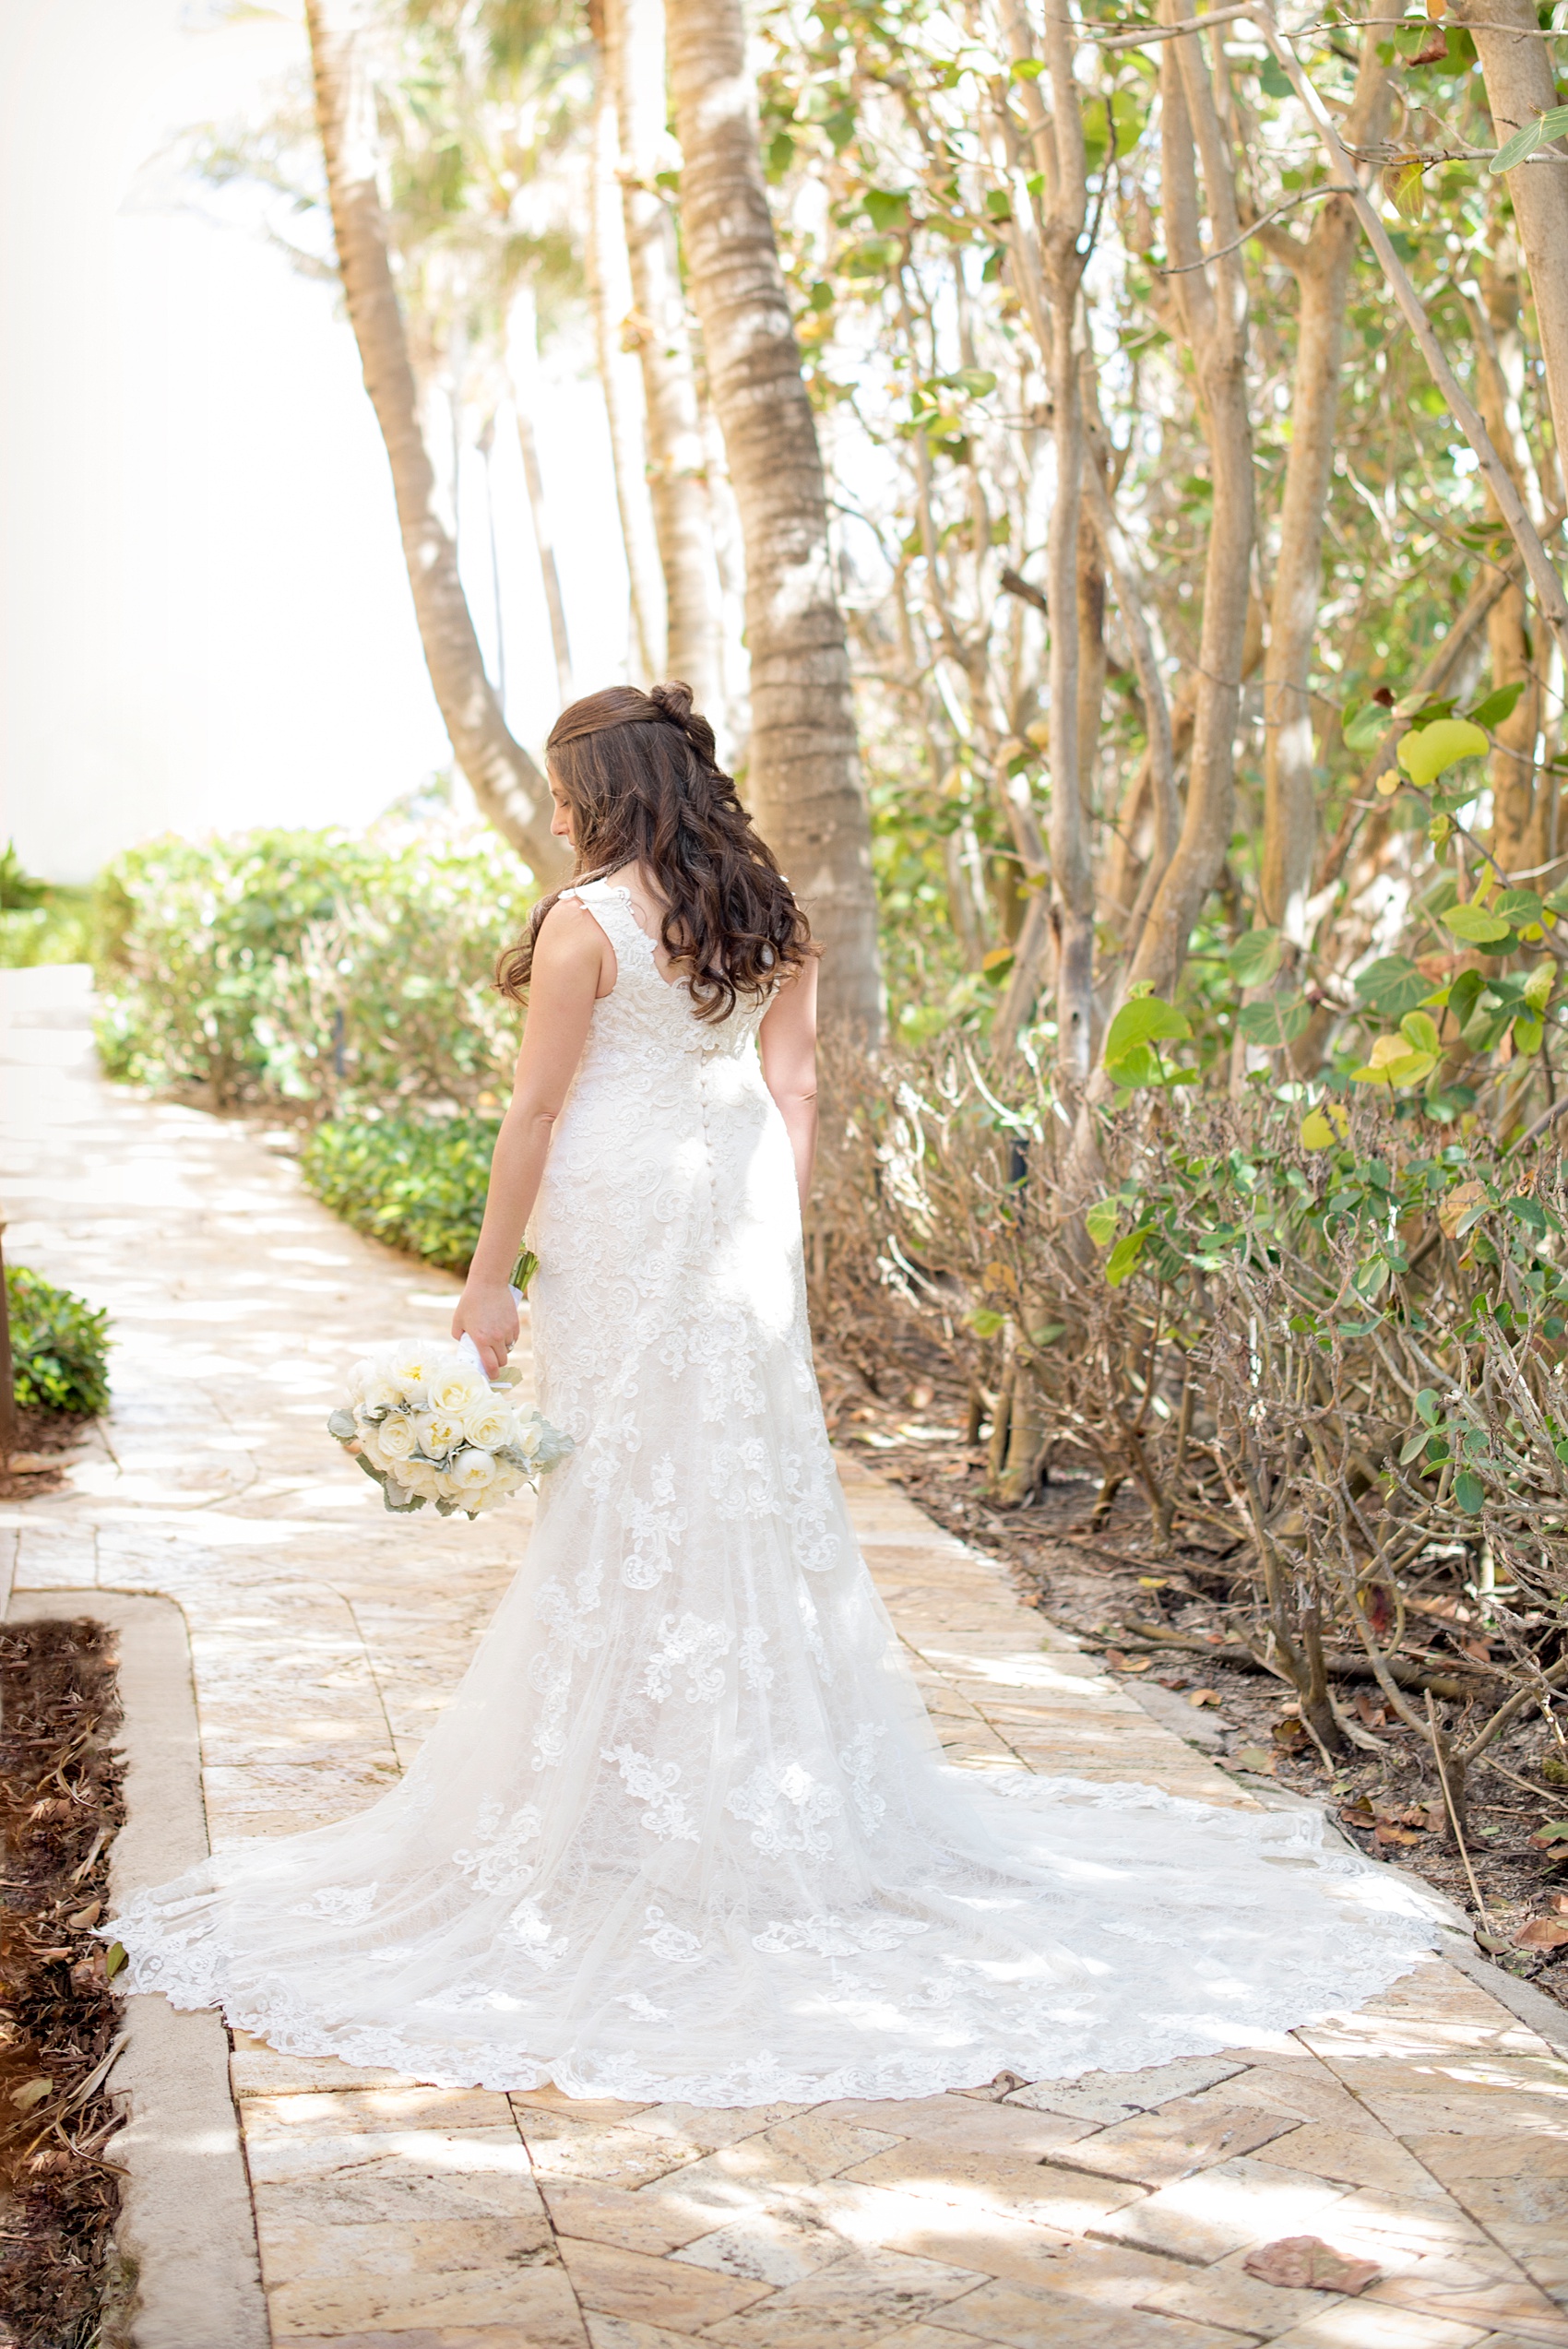 Wedding photos at Eau Palm Beach by Mikkel Paige Photography. Pictures right next to the ocean for a destination wedding. The bride wore a simple lace gown with a beautiful train. 